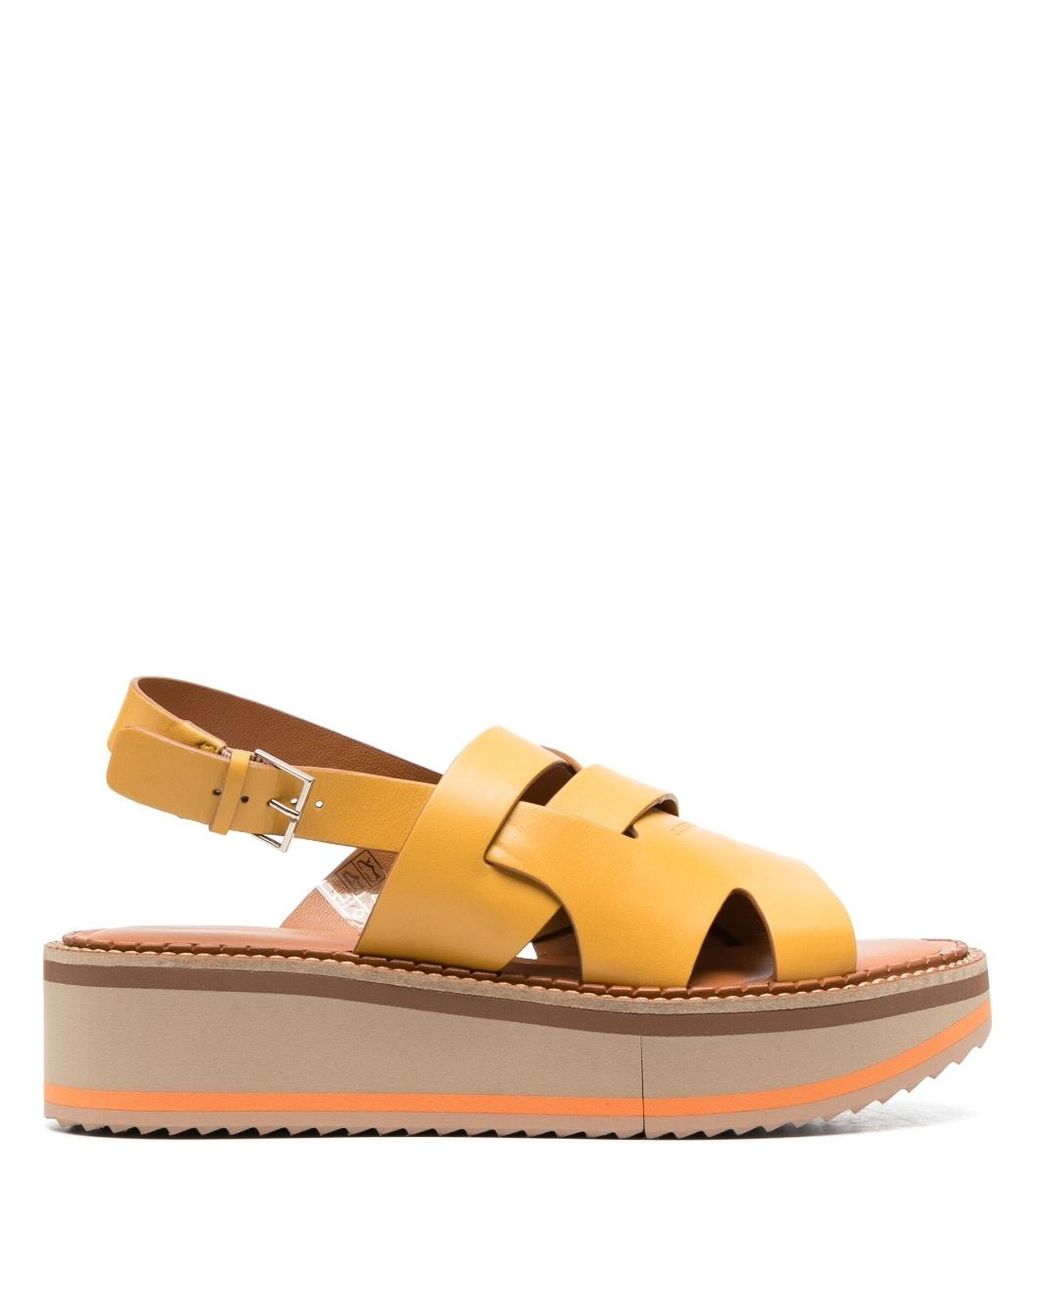 Robert Clergerie Franka Leather Sandals in Brown | Lyst